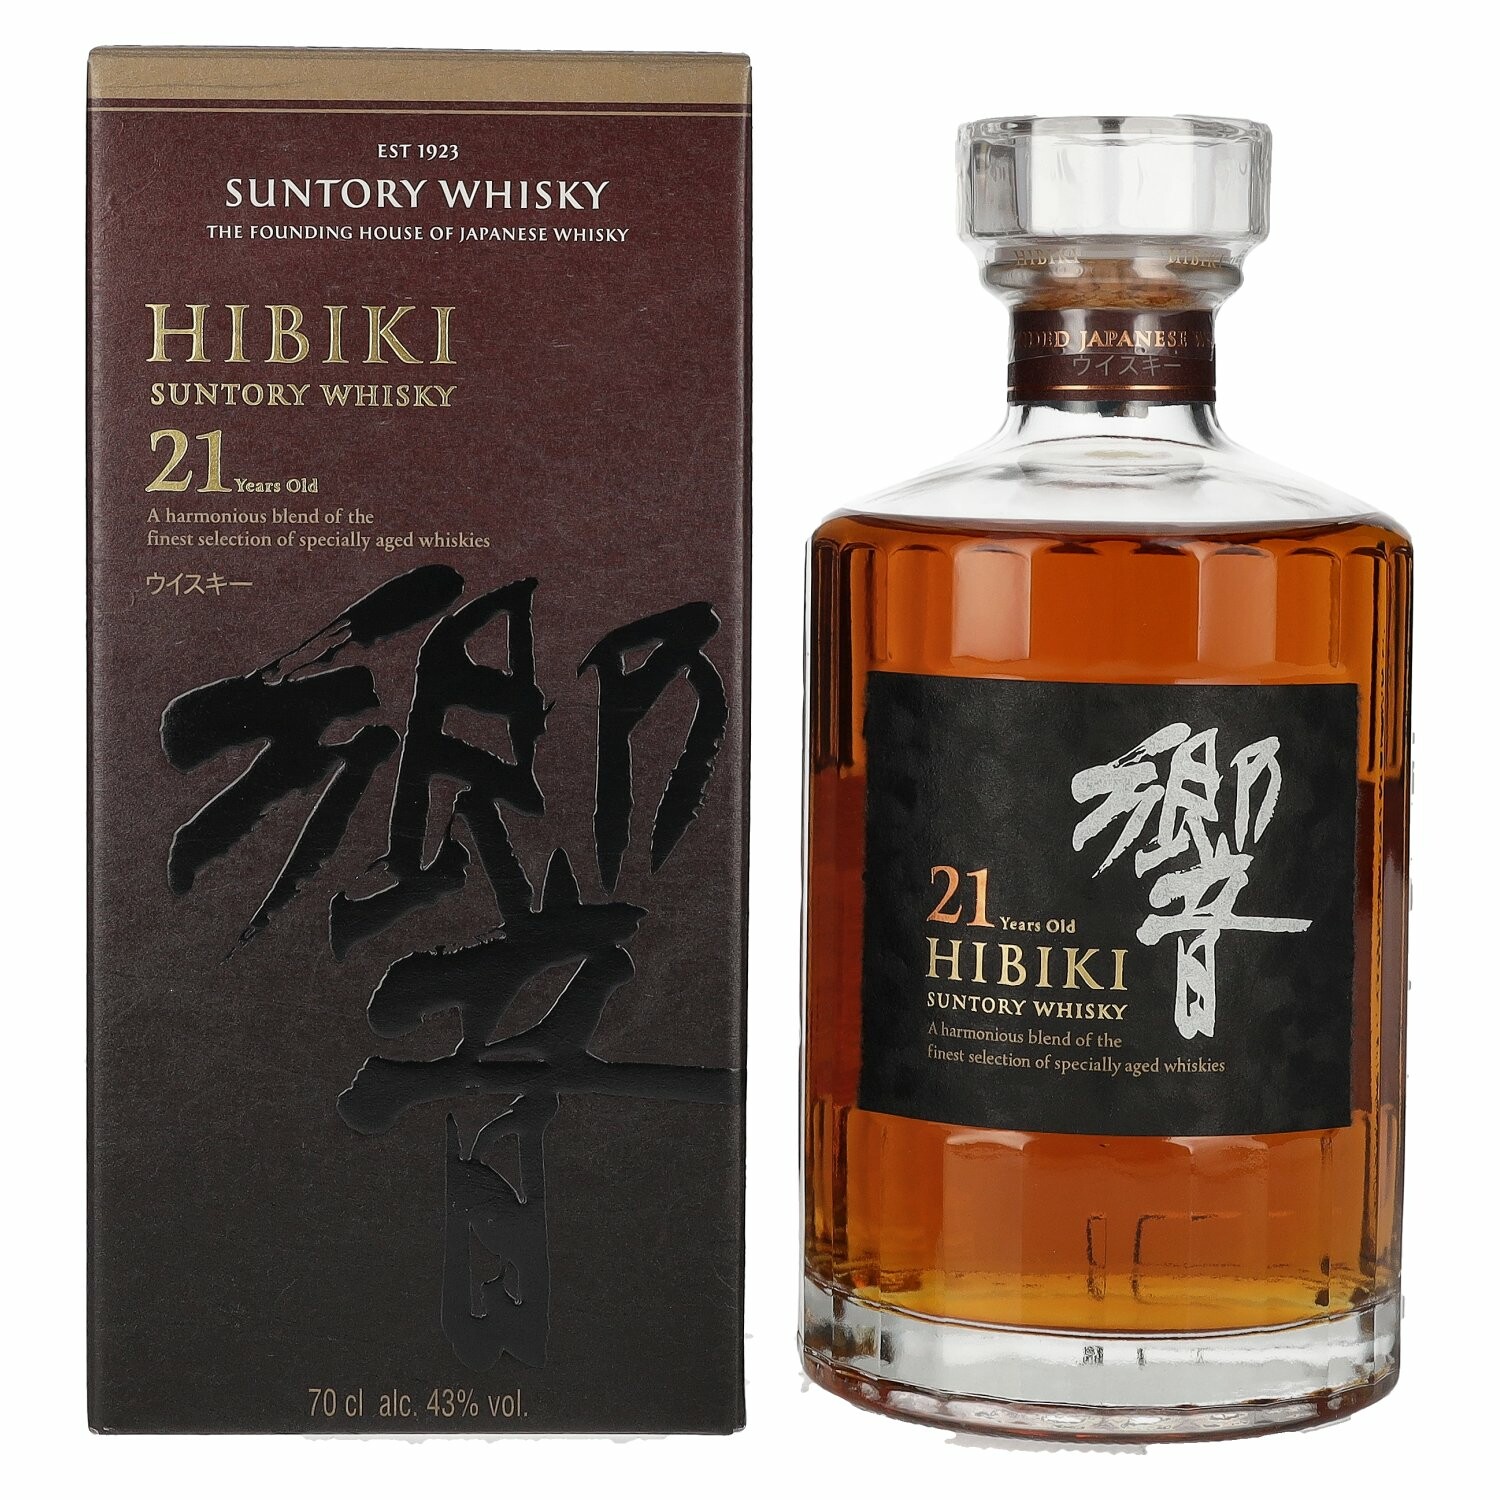 Suntory Hibiki 21 Years Old Blended Japanese Whisky 43% Vol. 0,7l in Giftbox